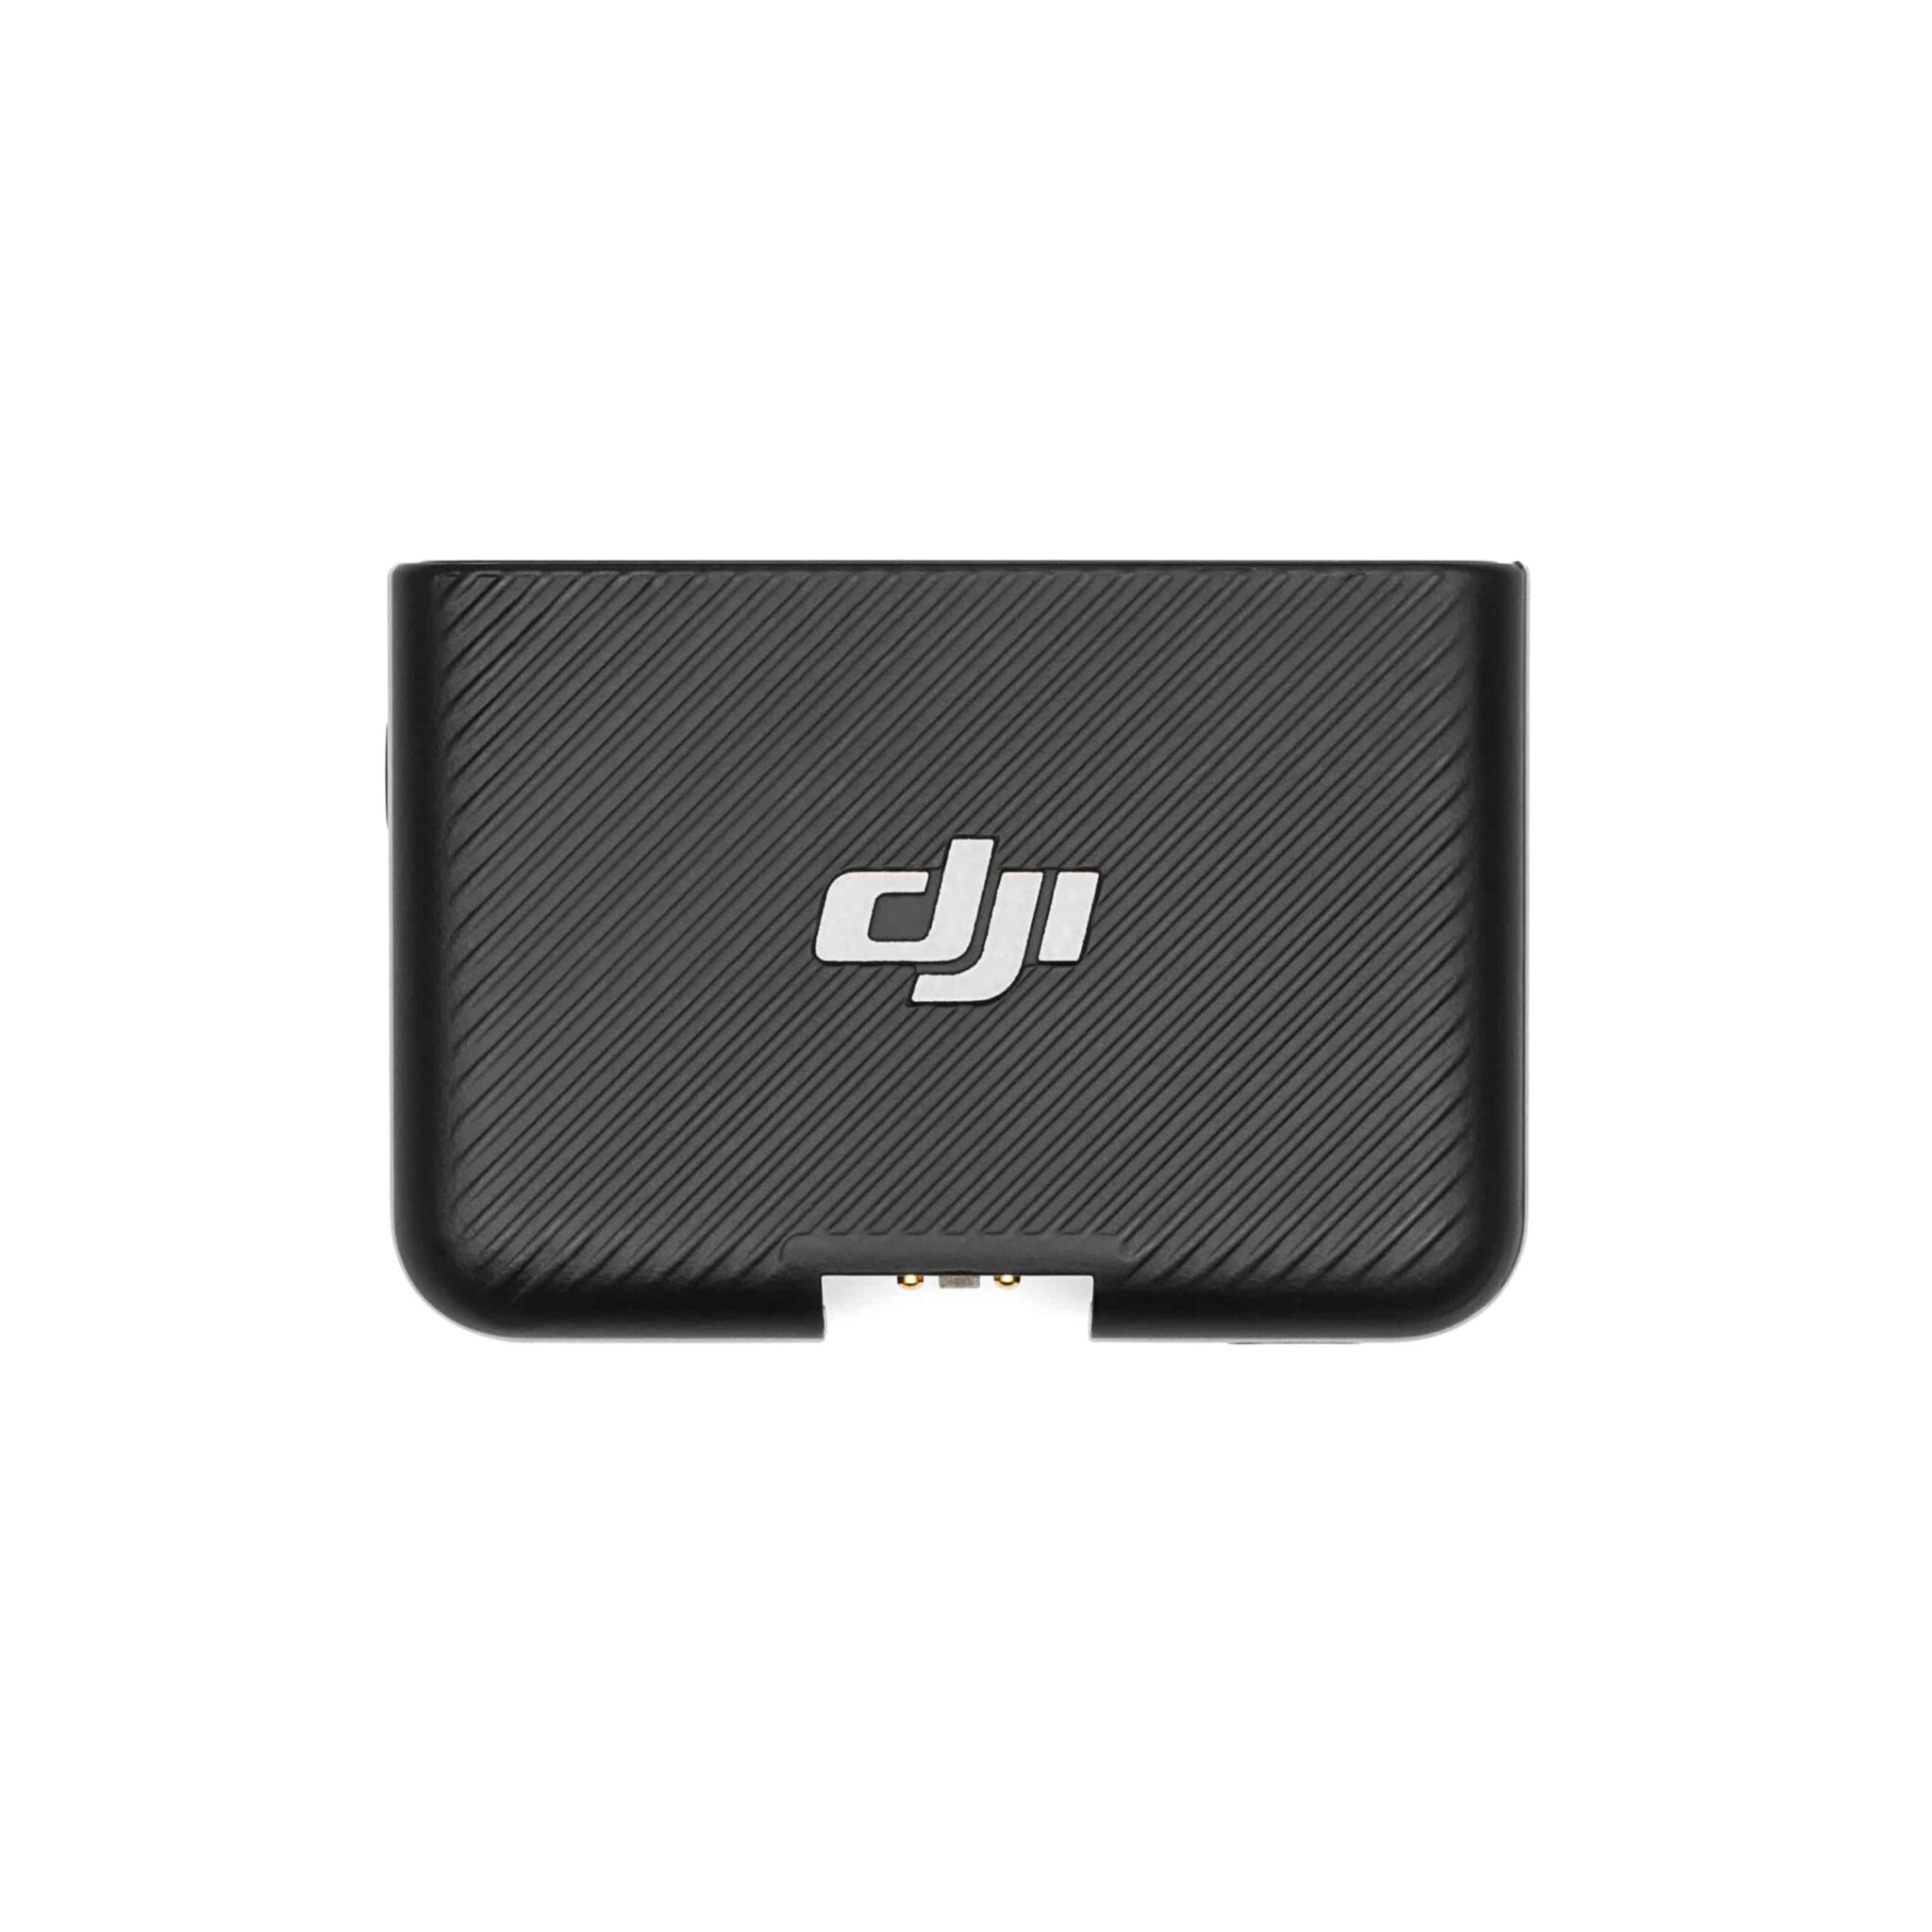 DJI Mic is an excellent, dual-channel wireless microphone system anyone can  use